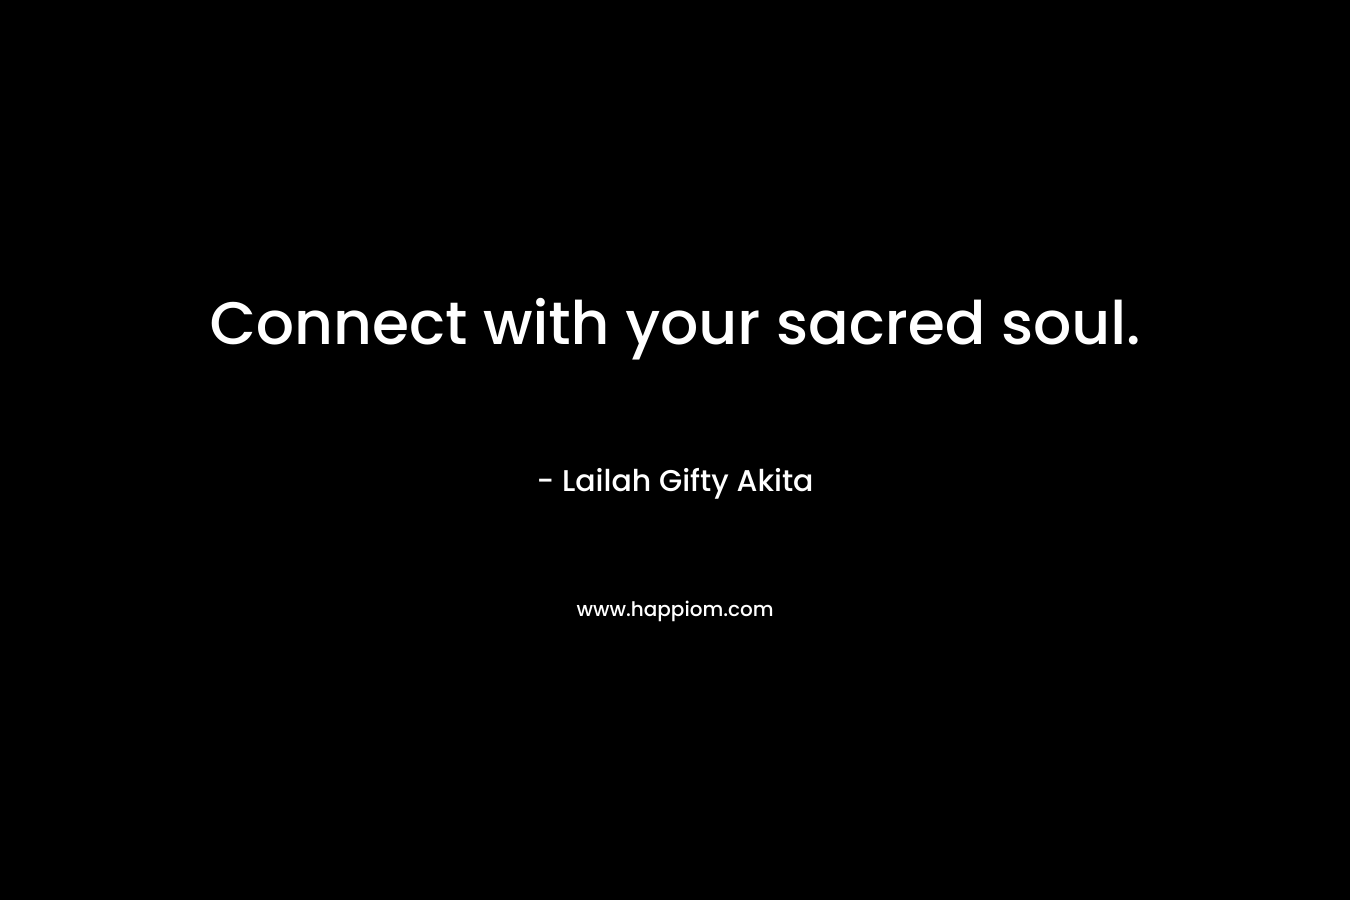 Connect with your sacred soul.